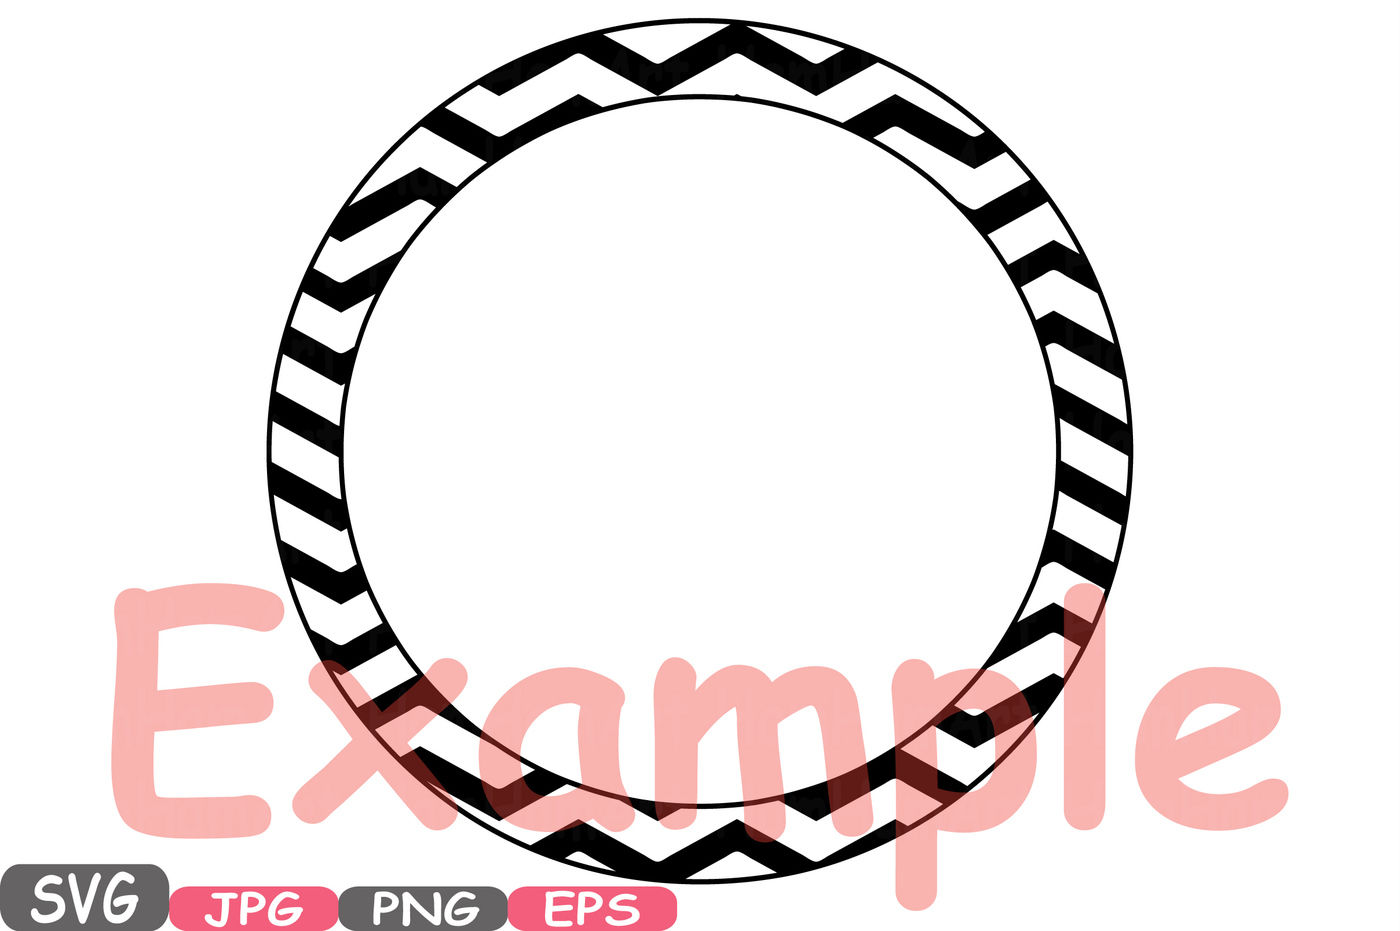 How to Make a Circle Monogram with an Alphabet Set in Silhouette